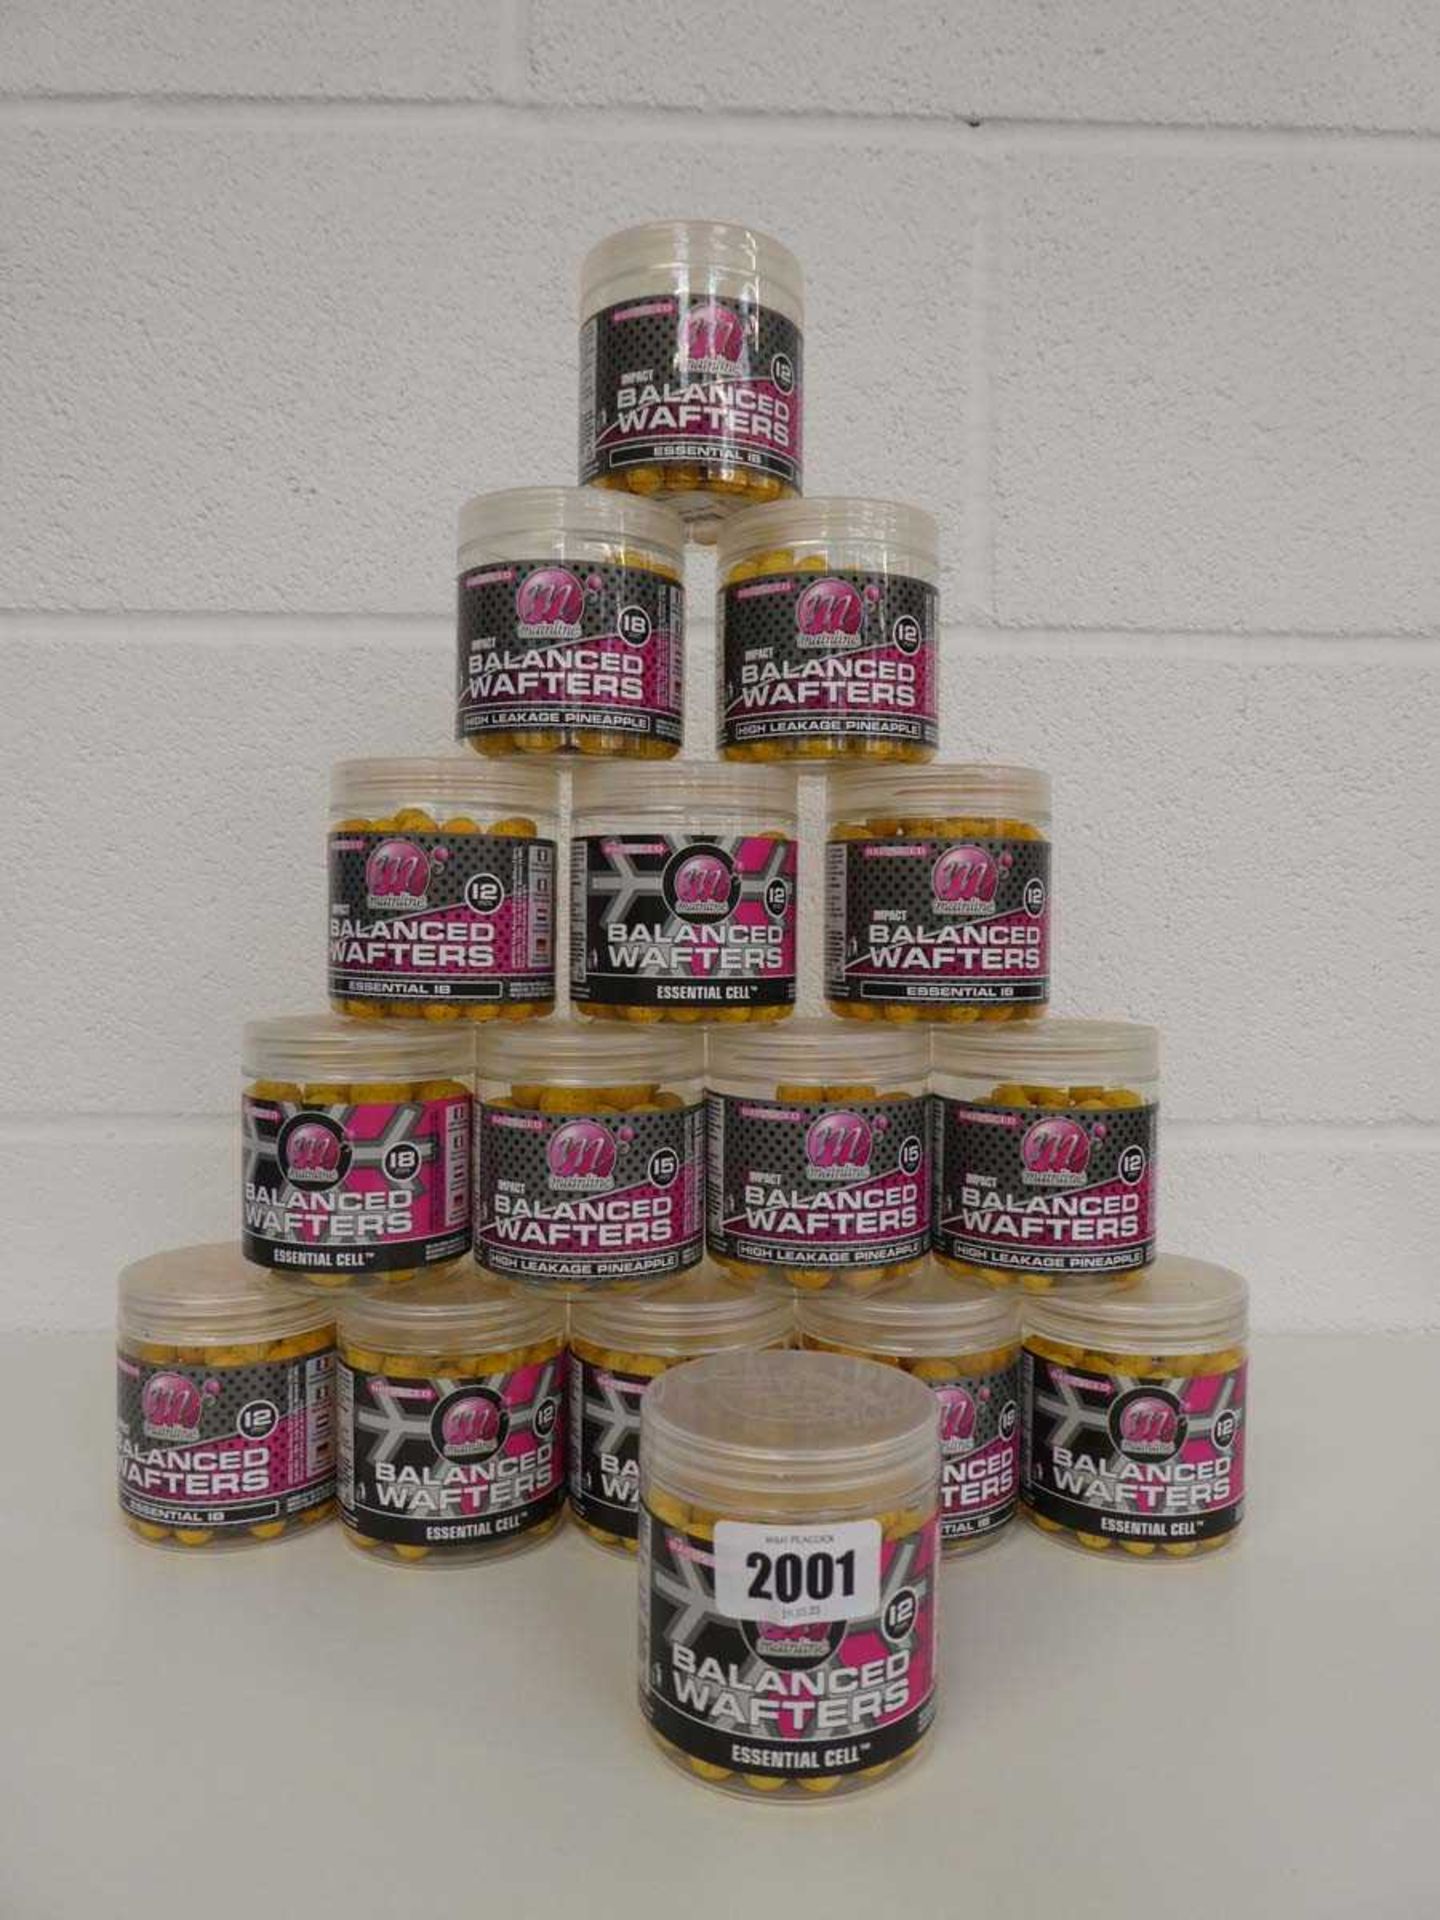 16 pots of Mainline balanced wafters carp bait incl. essential cell and pineapple flavours